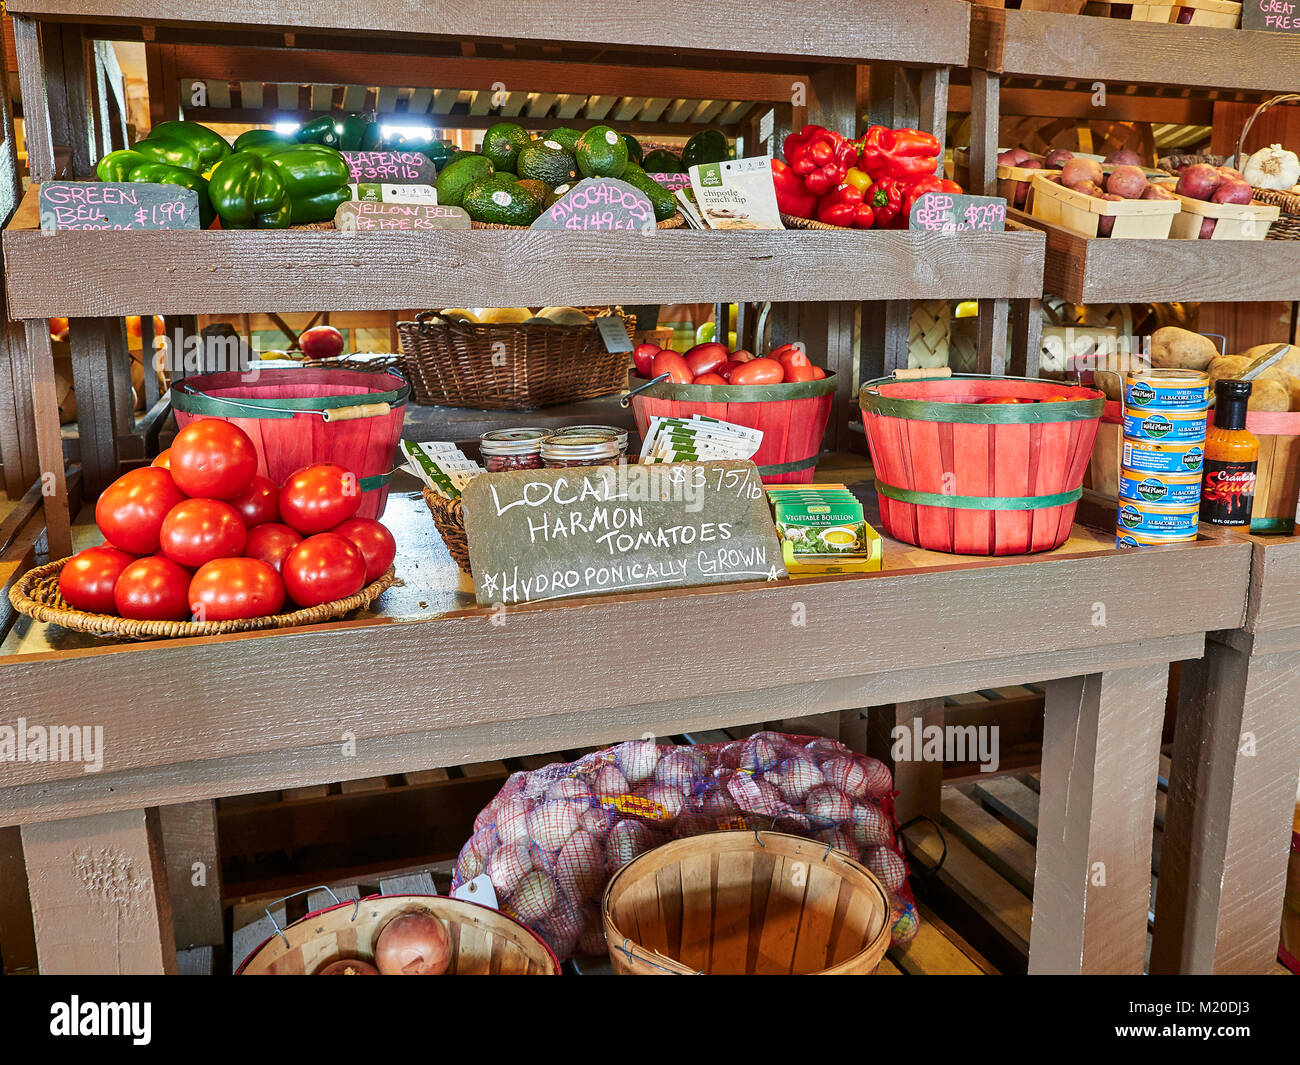 Display shelves in local fresh produce specialty market with hydroponically grown Harmon tomatoes and other fruits and vegetables in Auburn Alabama. Stock Photo